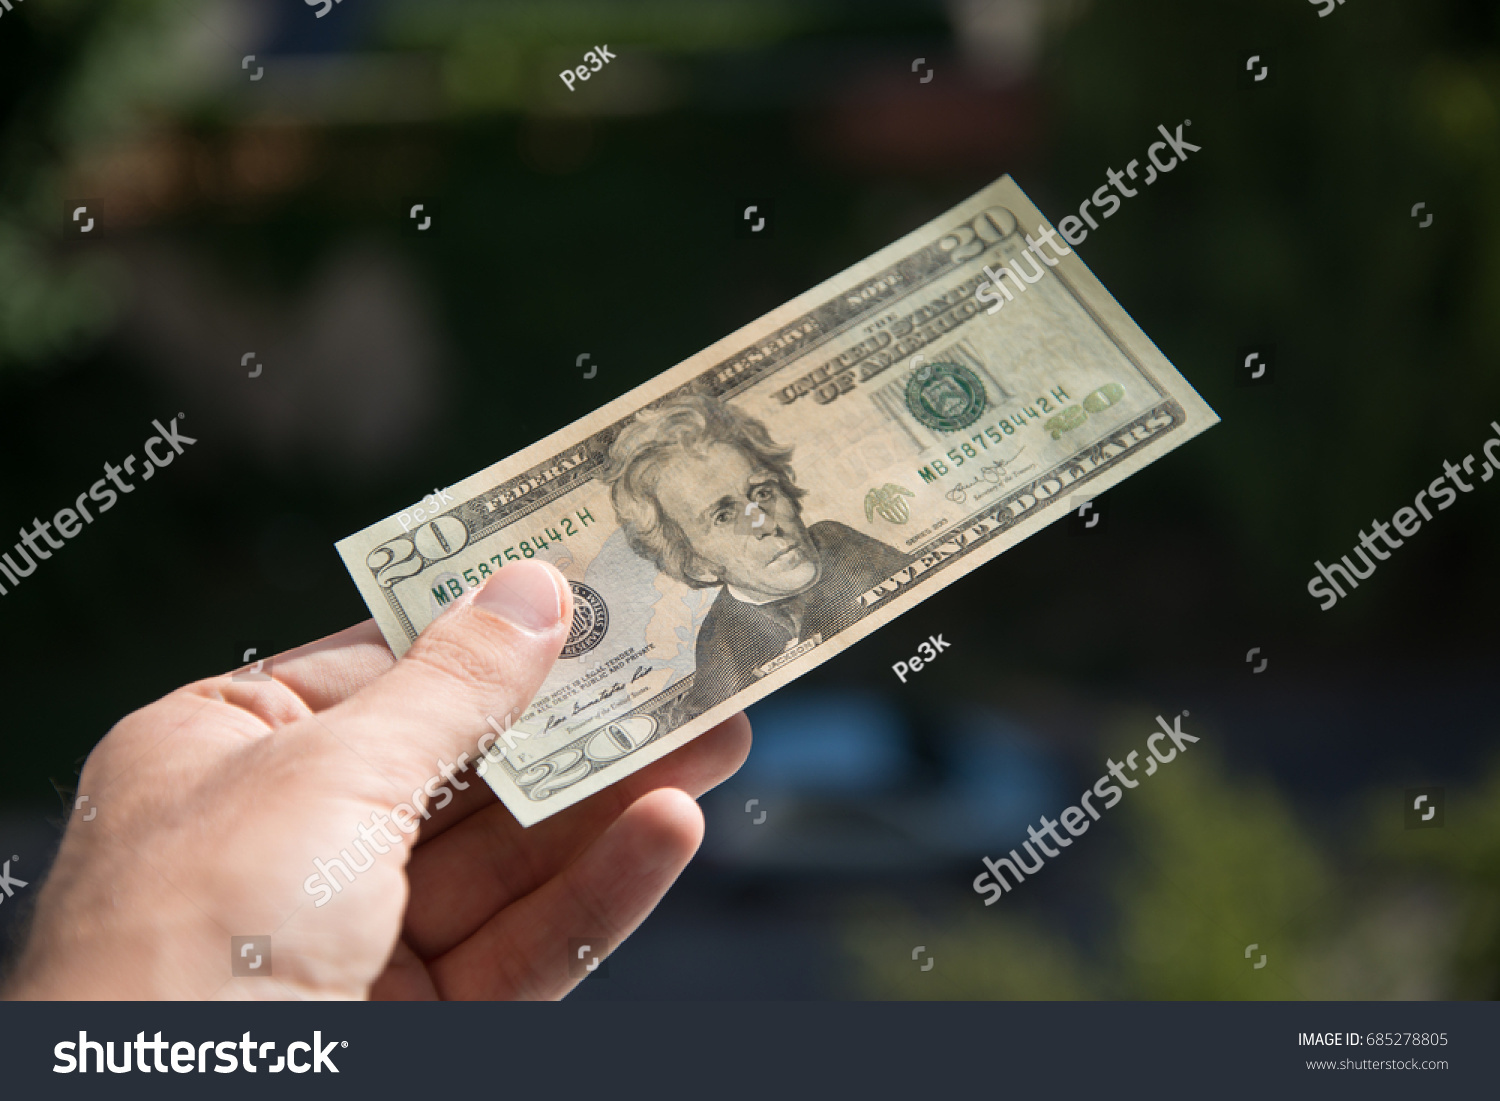 Man holding and giving 20 dollar banknote #685278805